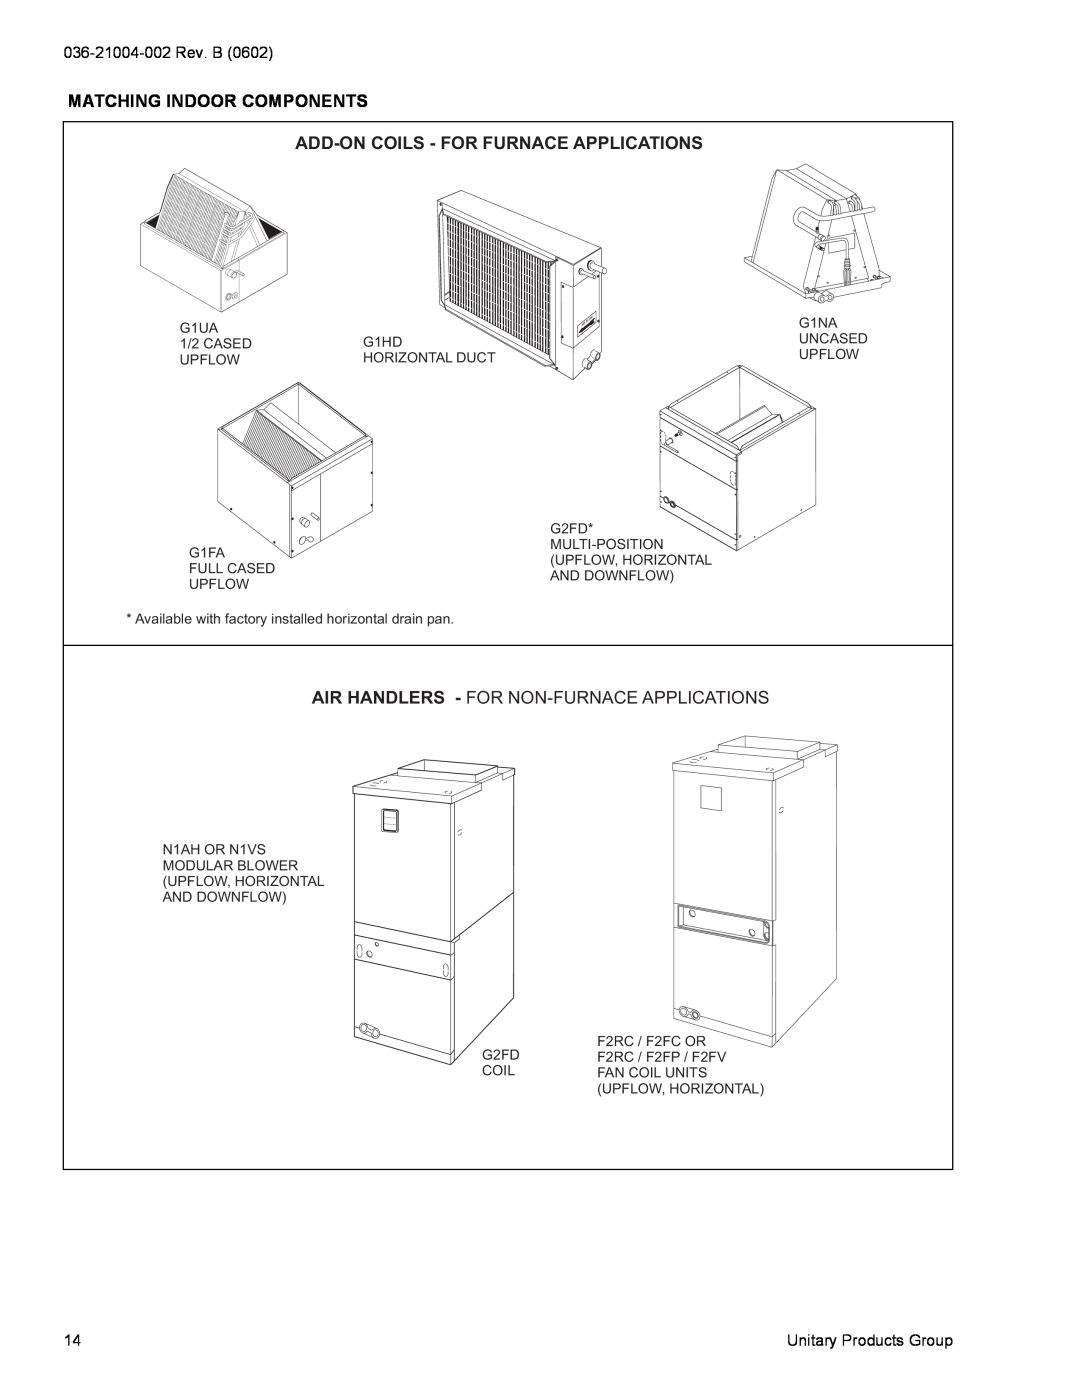 York FRCS024 warranty Matching Indoor Components, Add-Oncoils - For Furnace Applications 